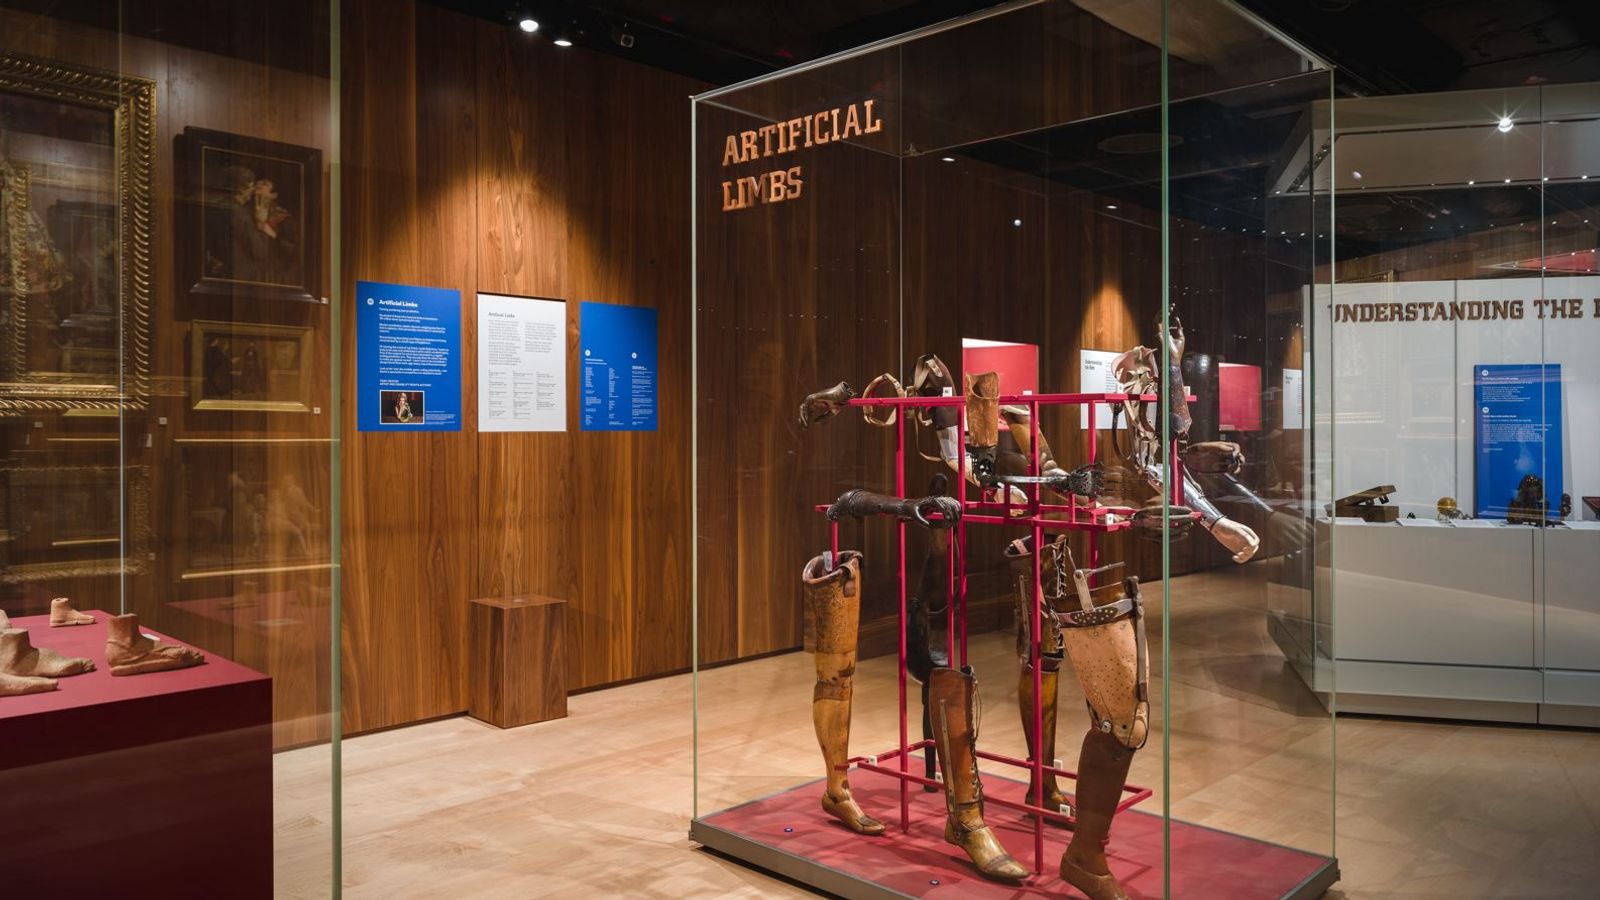 Medicine Man display: Wellcome Collection museum in London shuts ‘racist and sexist’ medical history exhibition